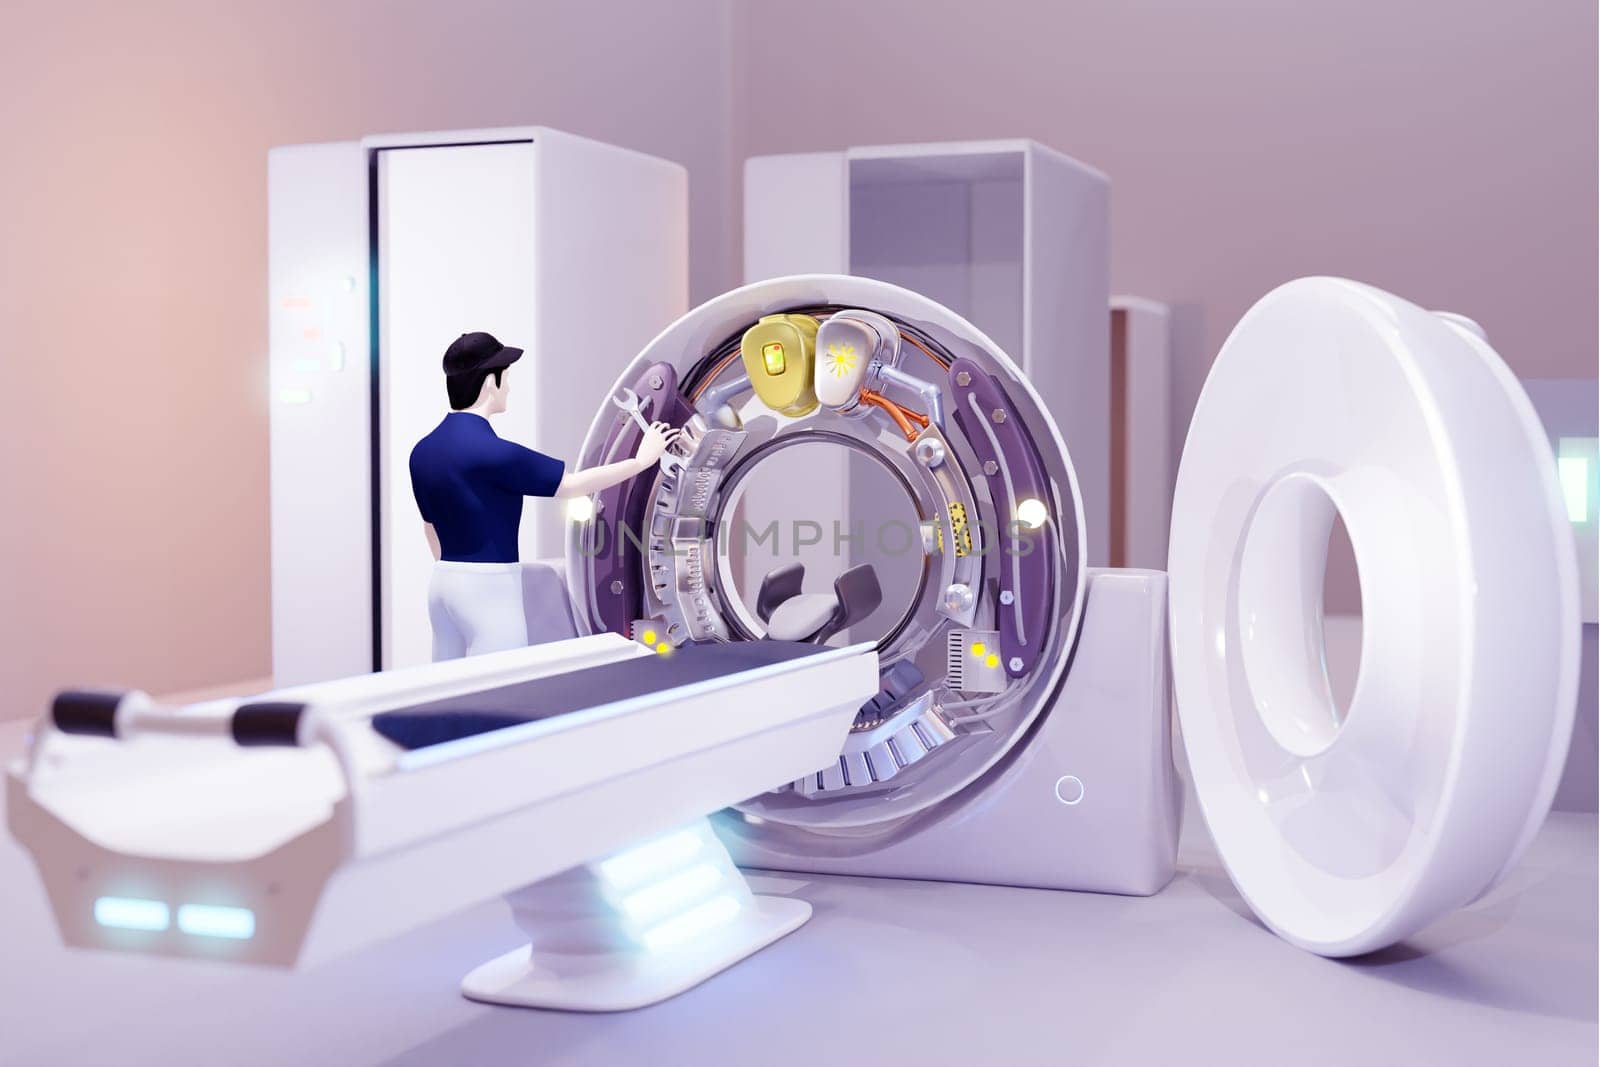 A maintenance engineer is checking the CT scan machine for normal operation every 6 months in the hospital. according to hospital standards.